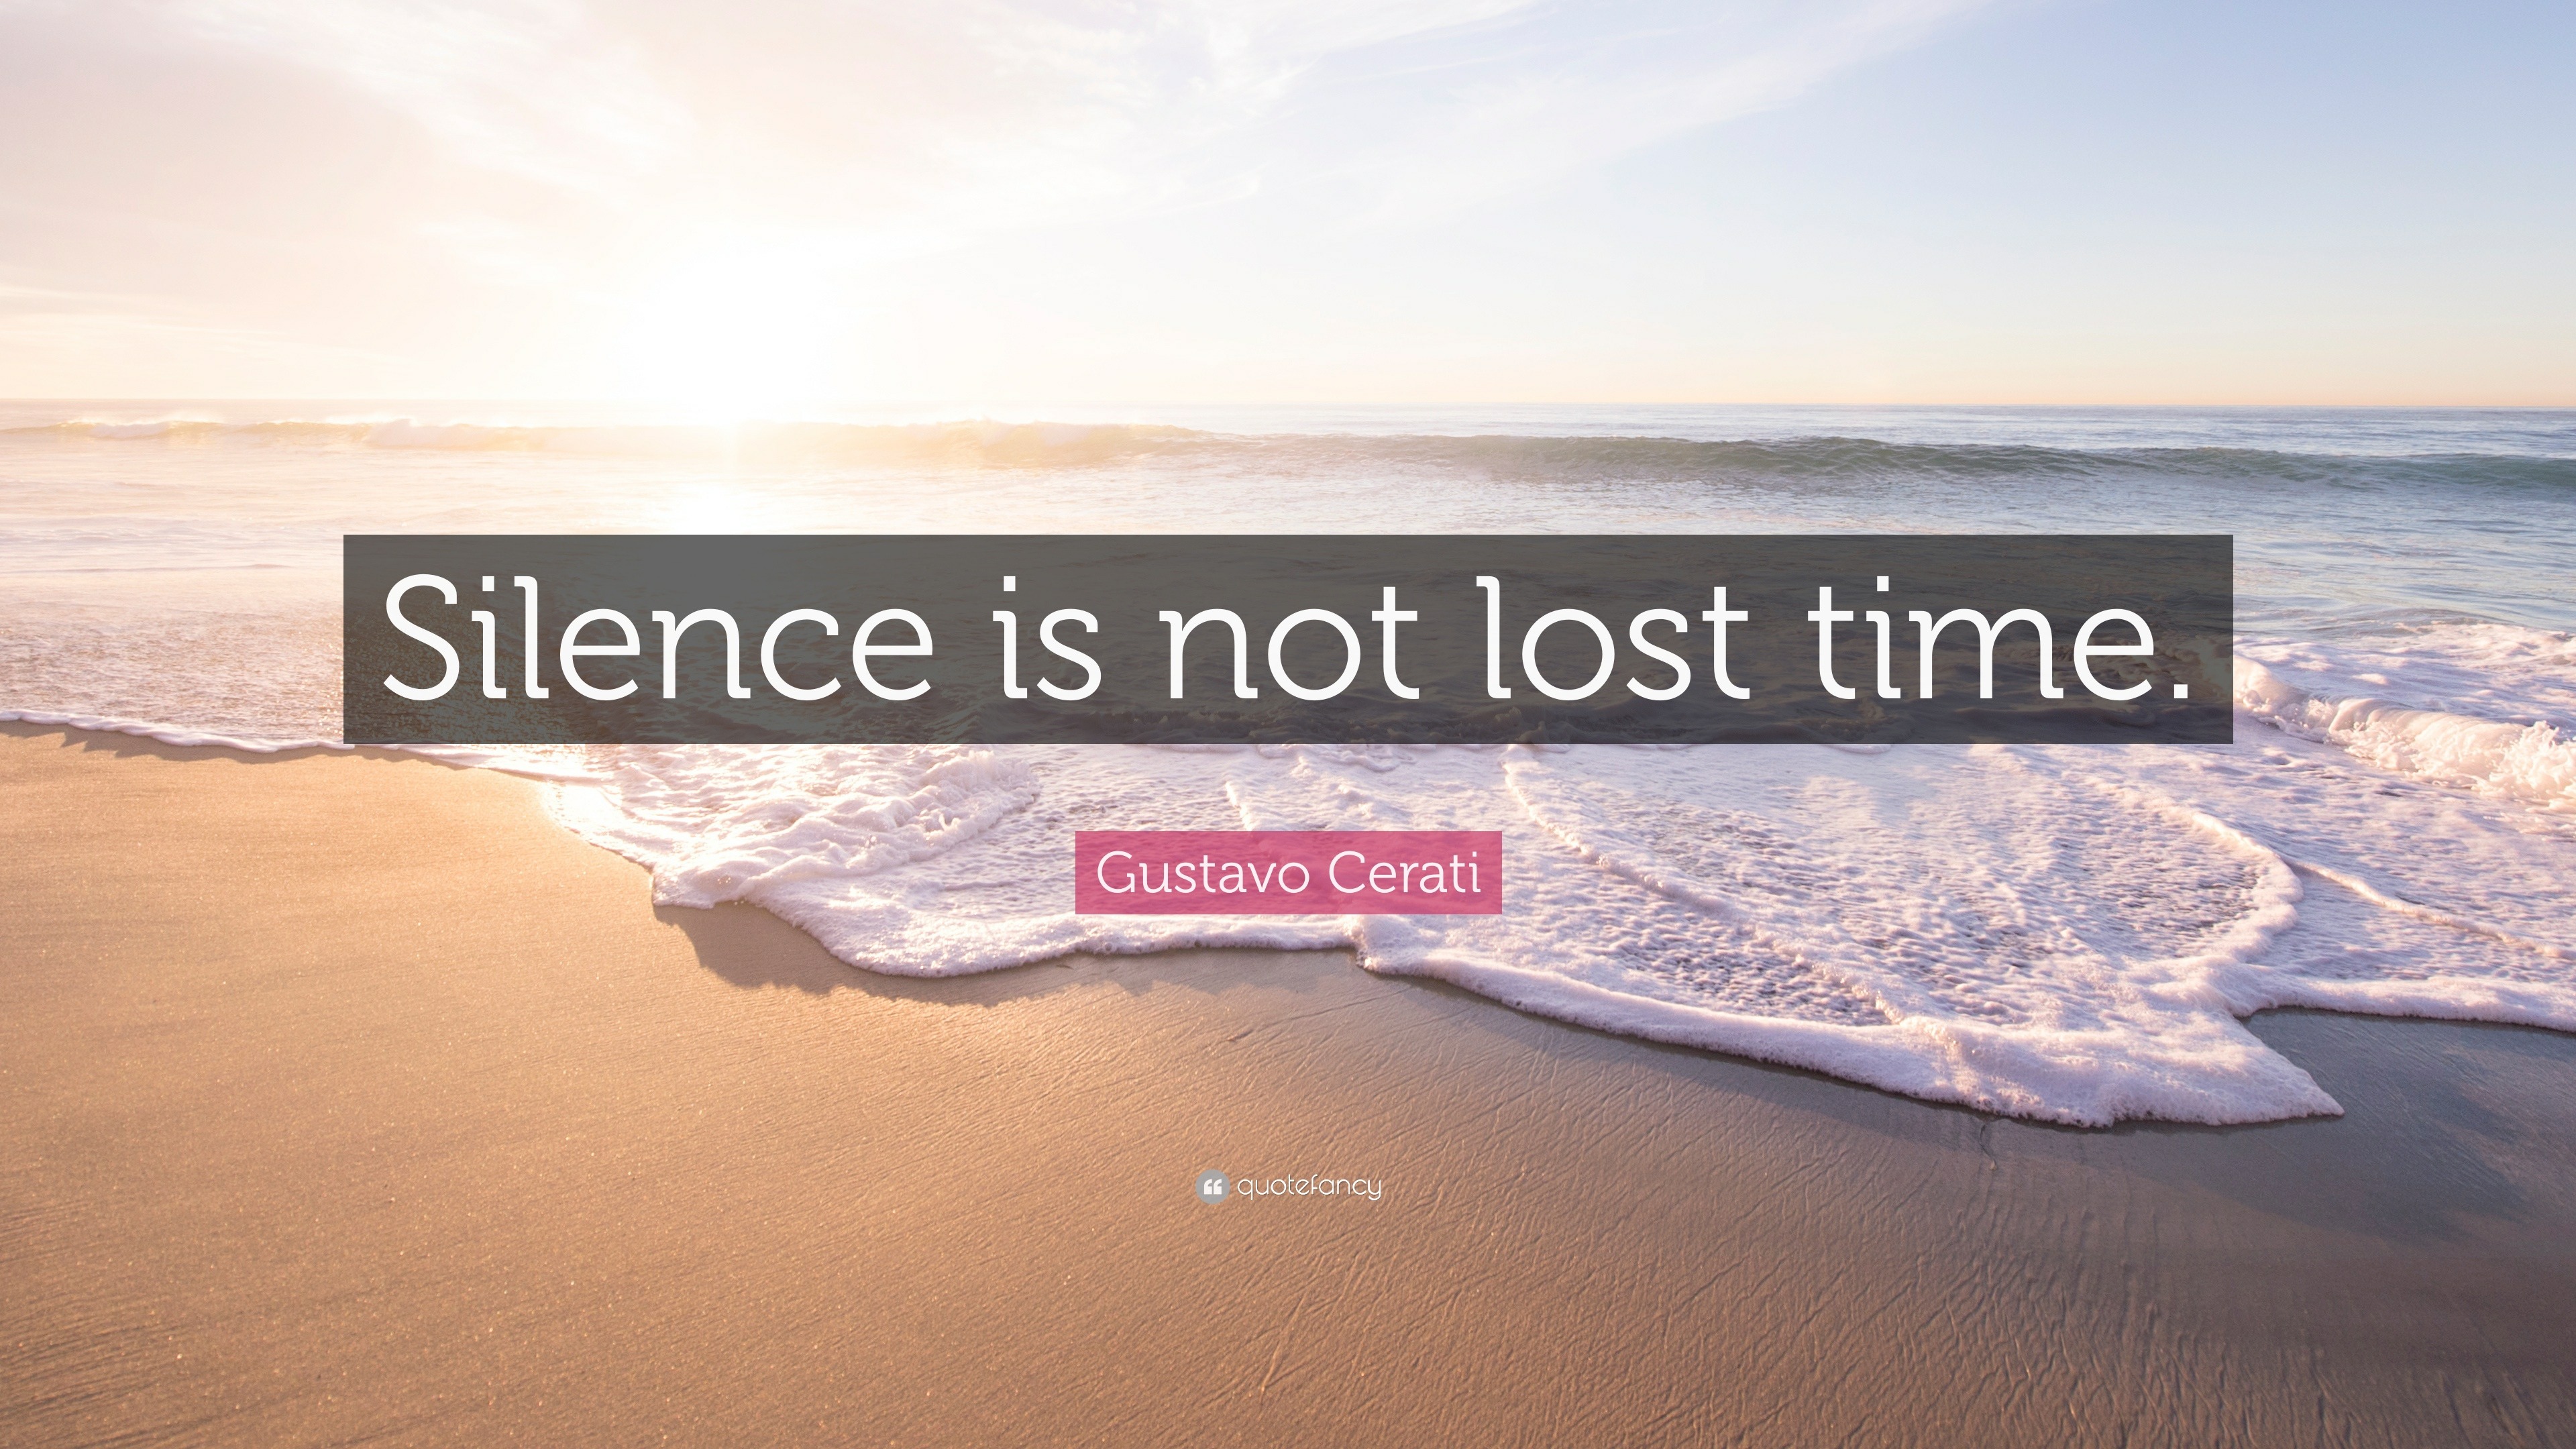 Gustavo Cerati Quote: “Silence is not lost time.”